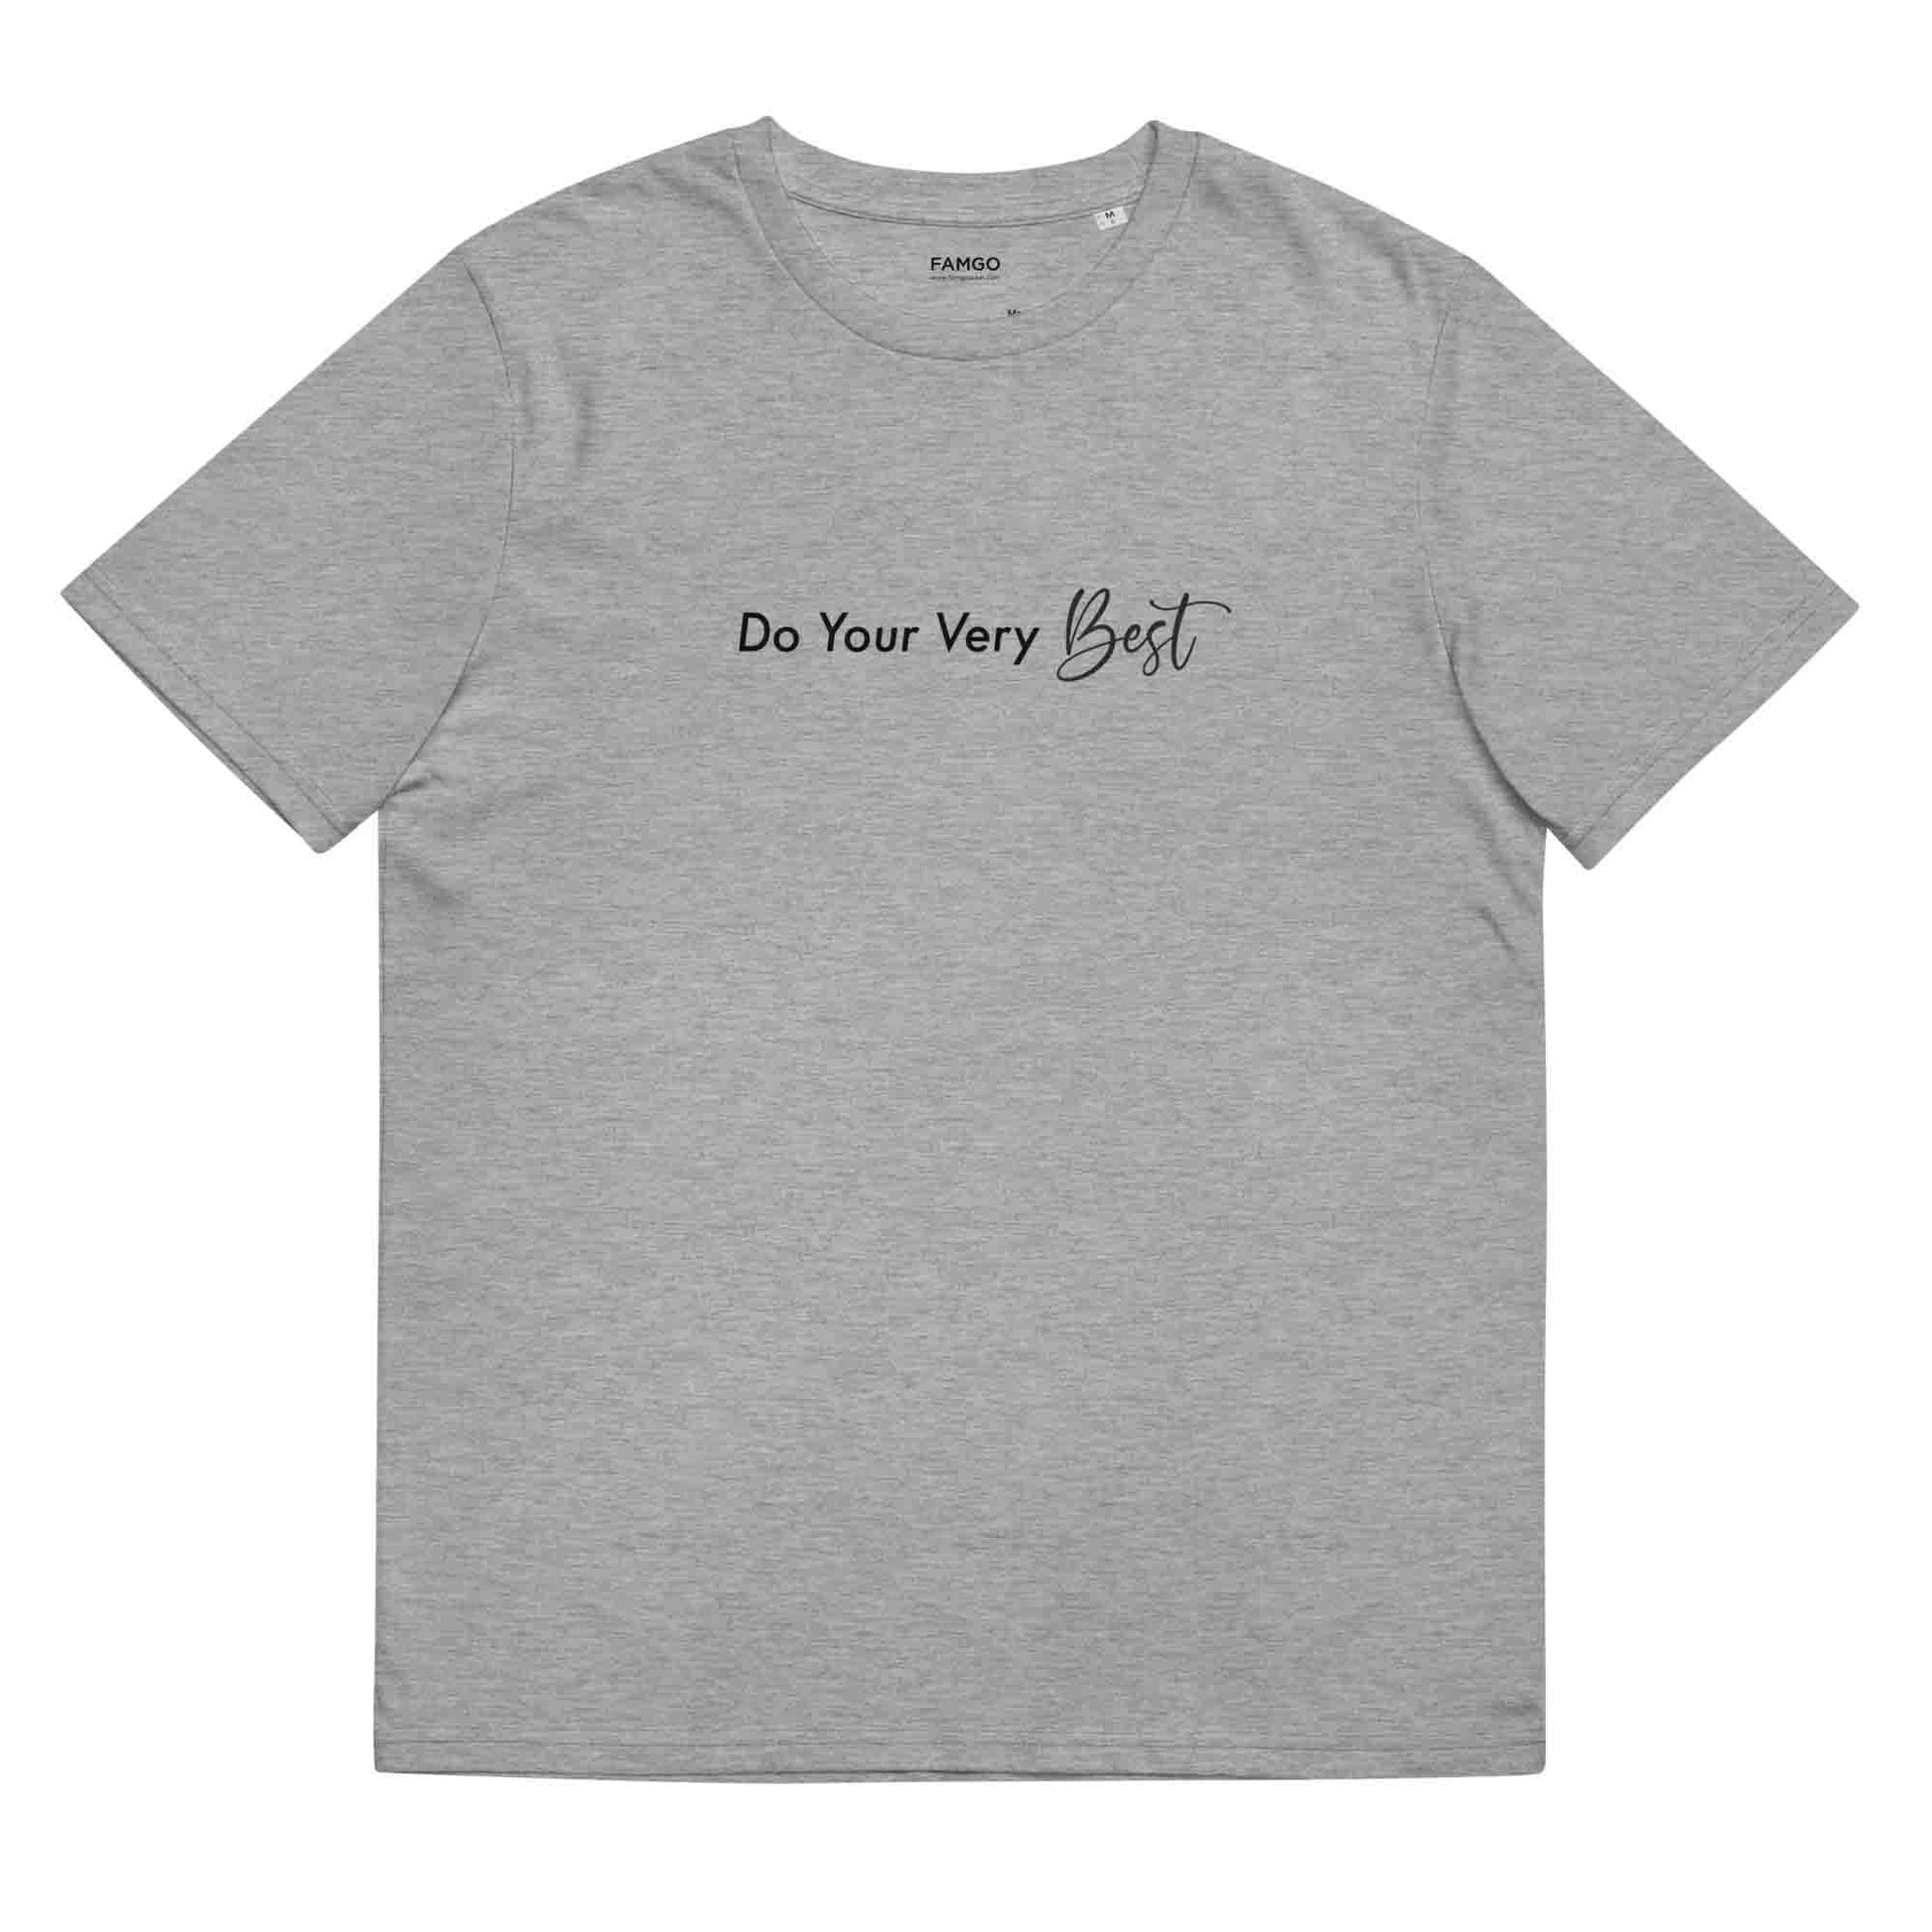 Men light gray motivational t-shirt with motivational quote, "Do Your Very Best."